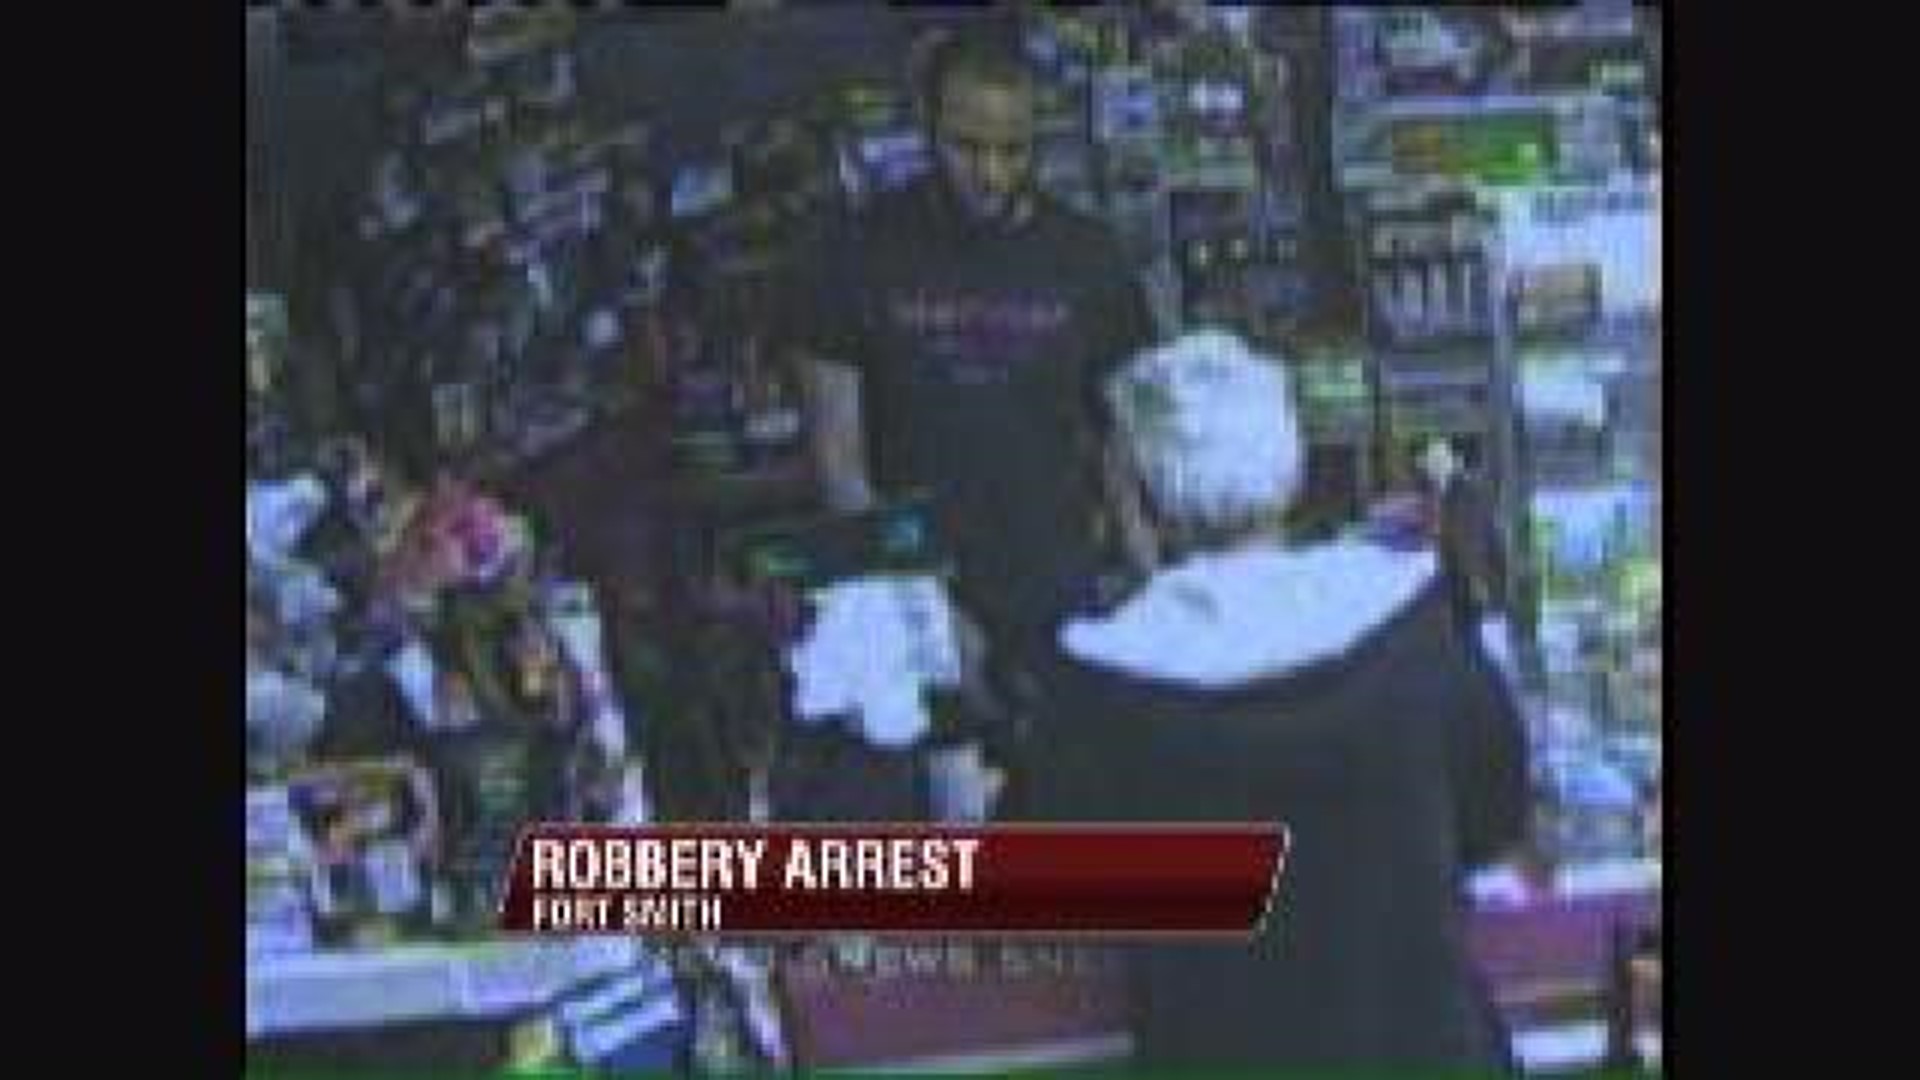 Suspect Arrested in Armed Robbery